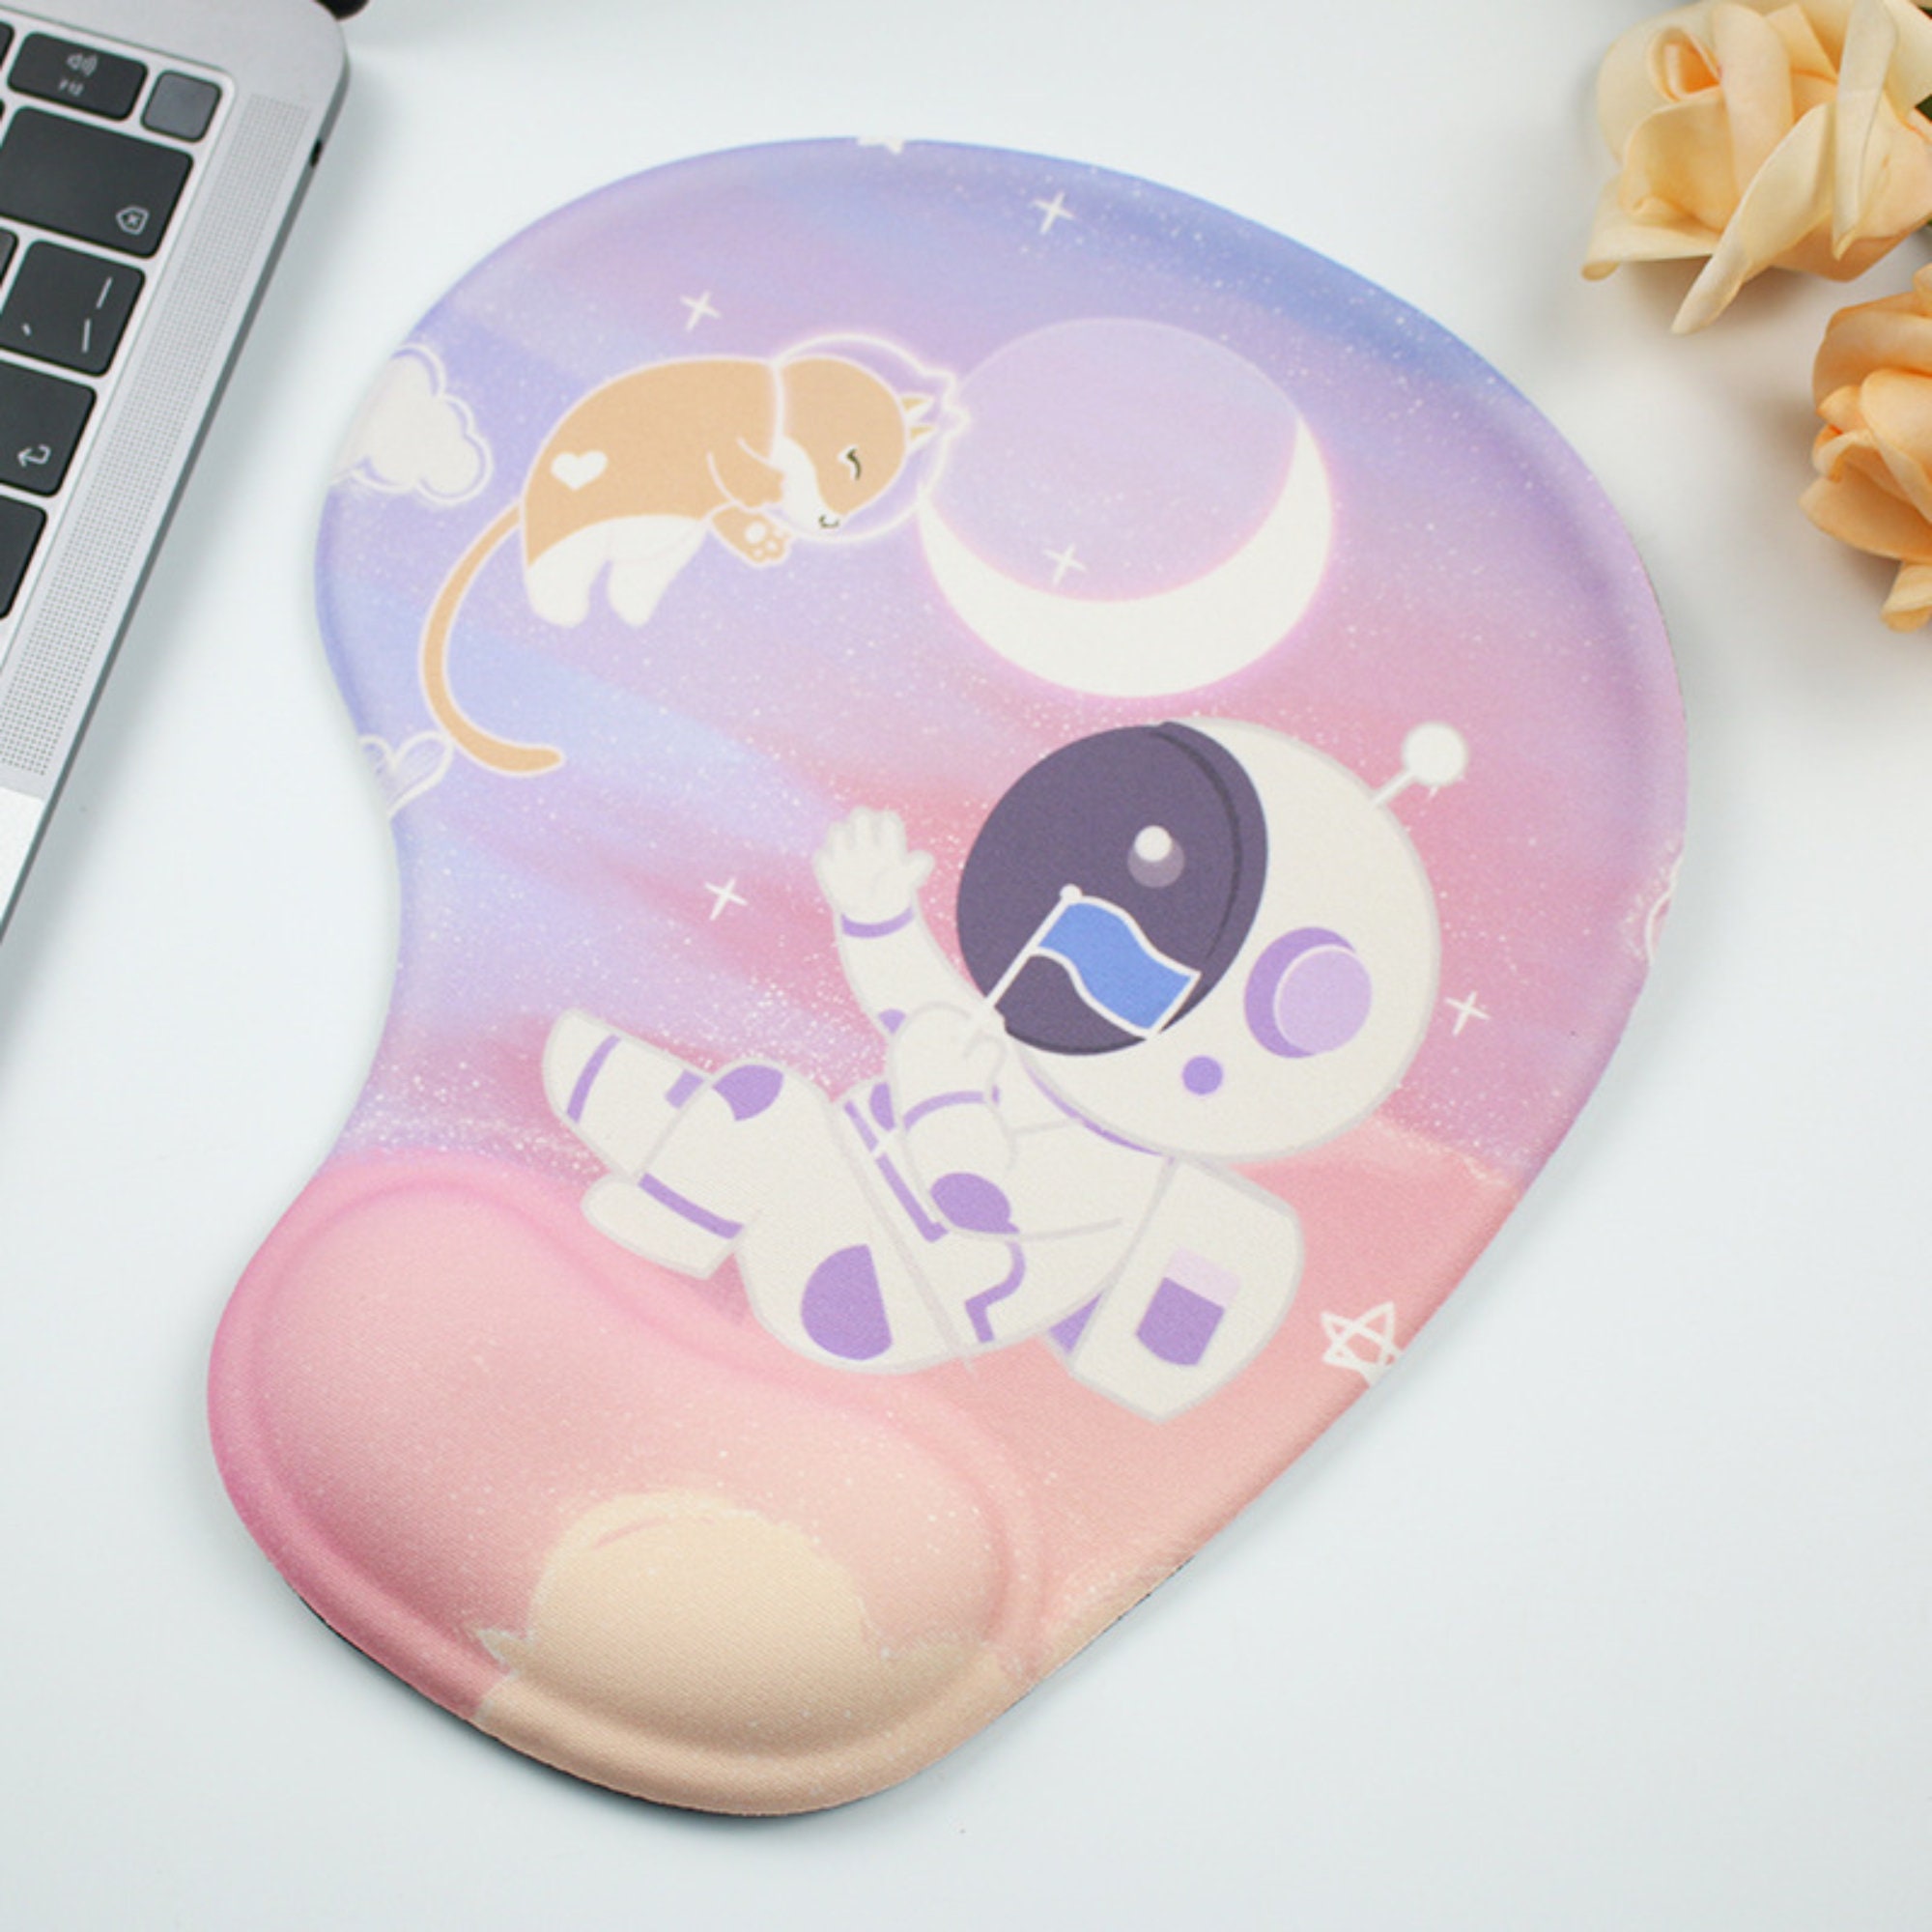 Mouse Pad Cute Small Cat Claw Wrist Rest Mouse Pads Silicone Gel Crystal  Transparent Comfort Soft Ergonomic Desk Wrist Support Mousepad Anti-Slip